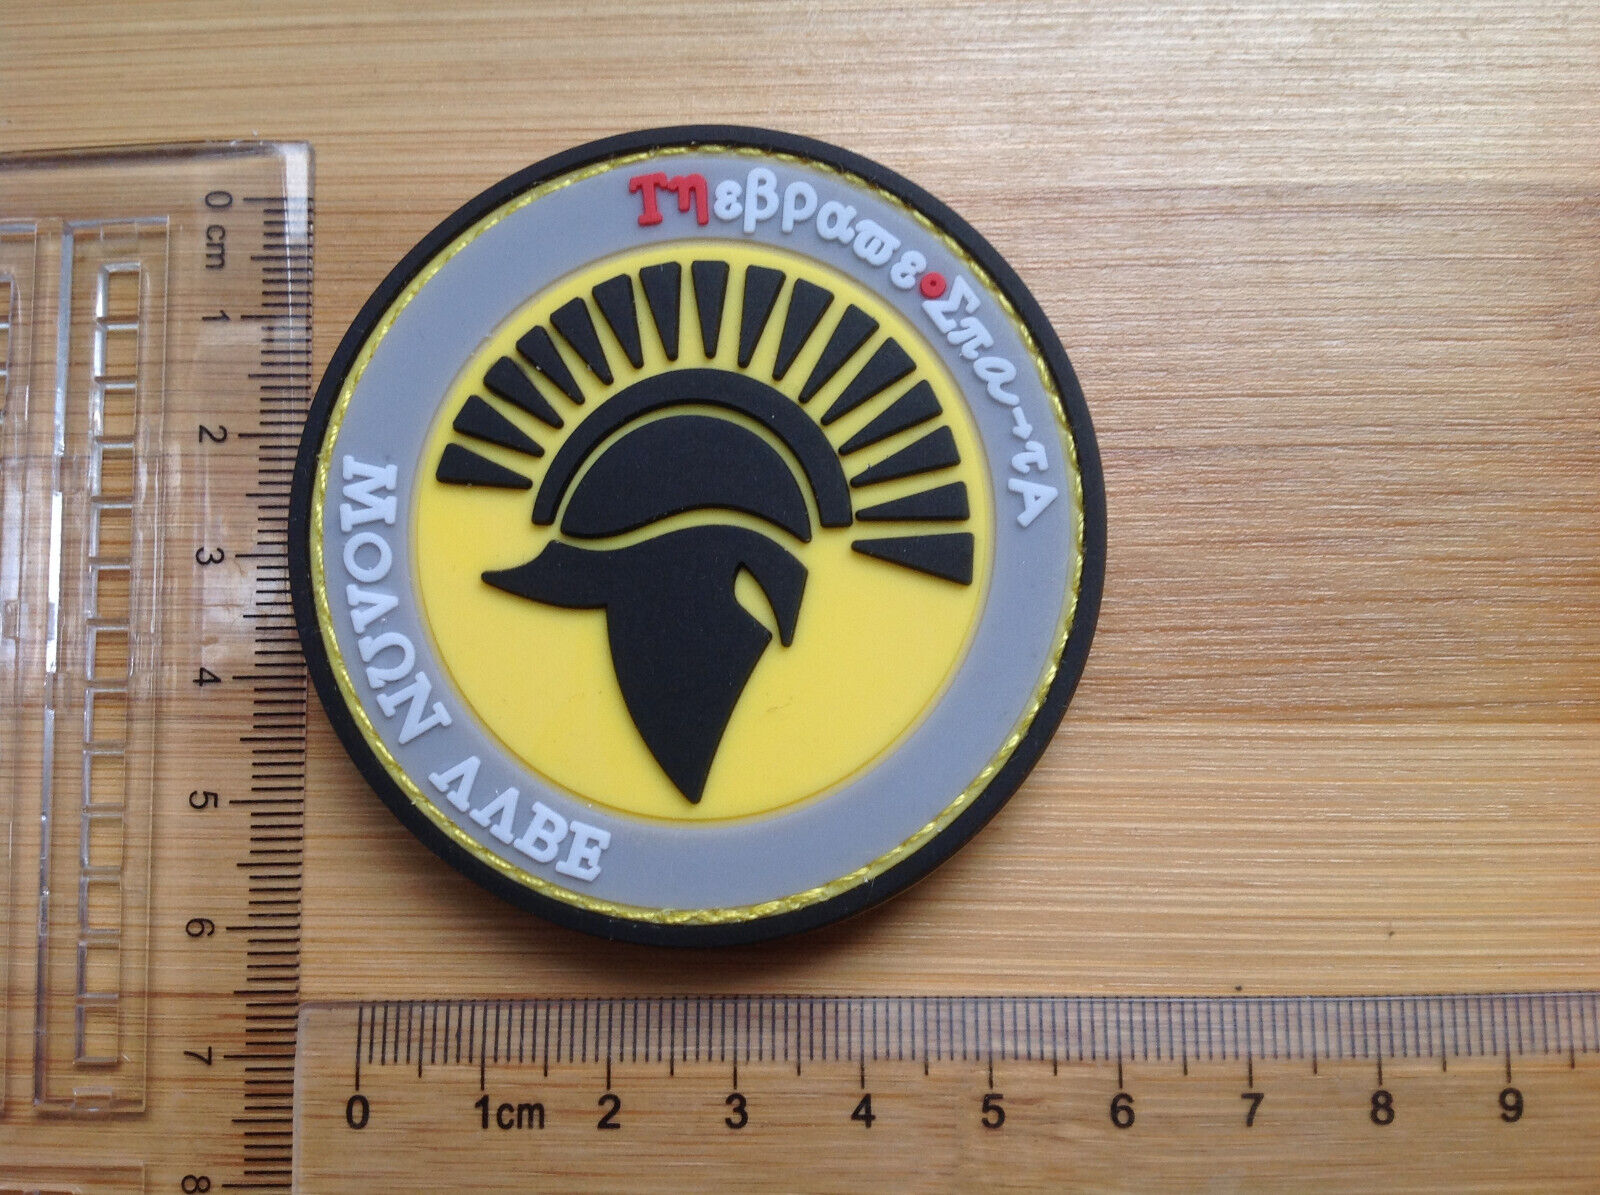 6cm MOLON LABE KING OF SPARTA  3D PVC TACTICAL ARMY MORALE RUBBER  PATCH Yellow